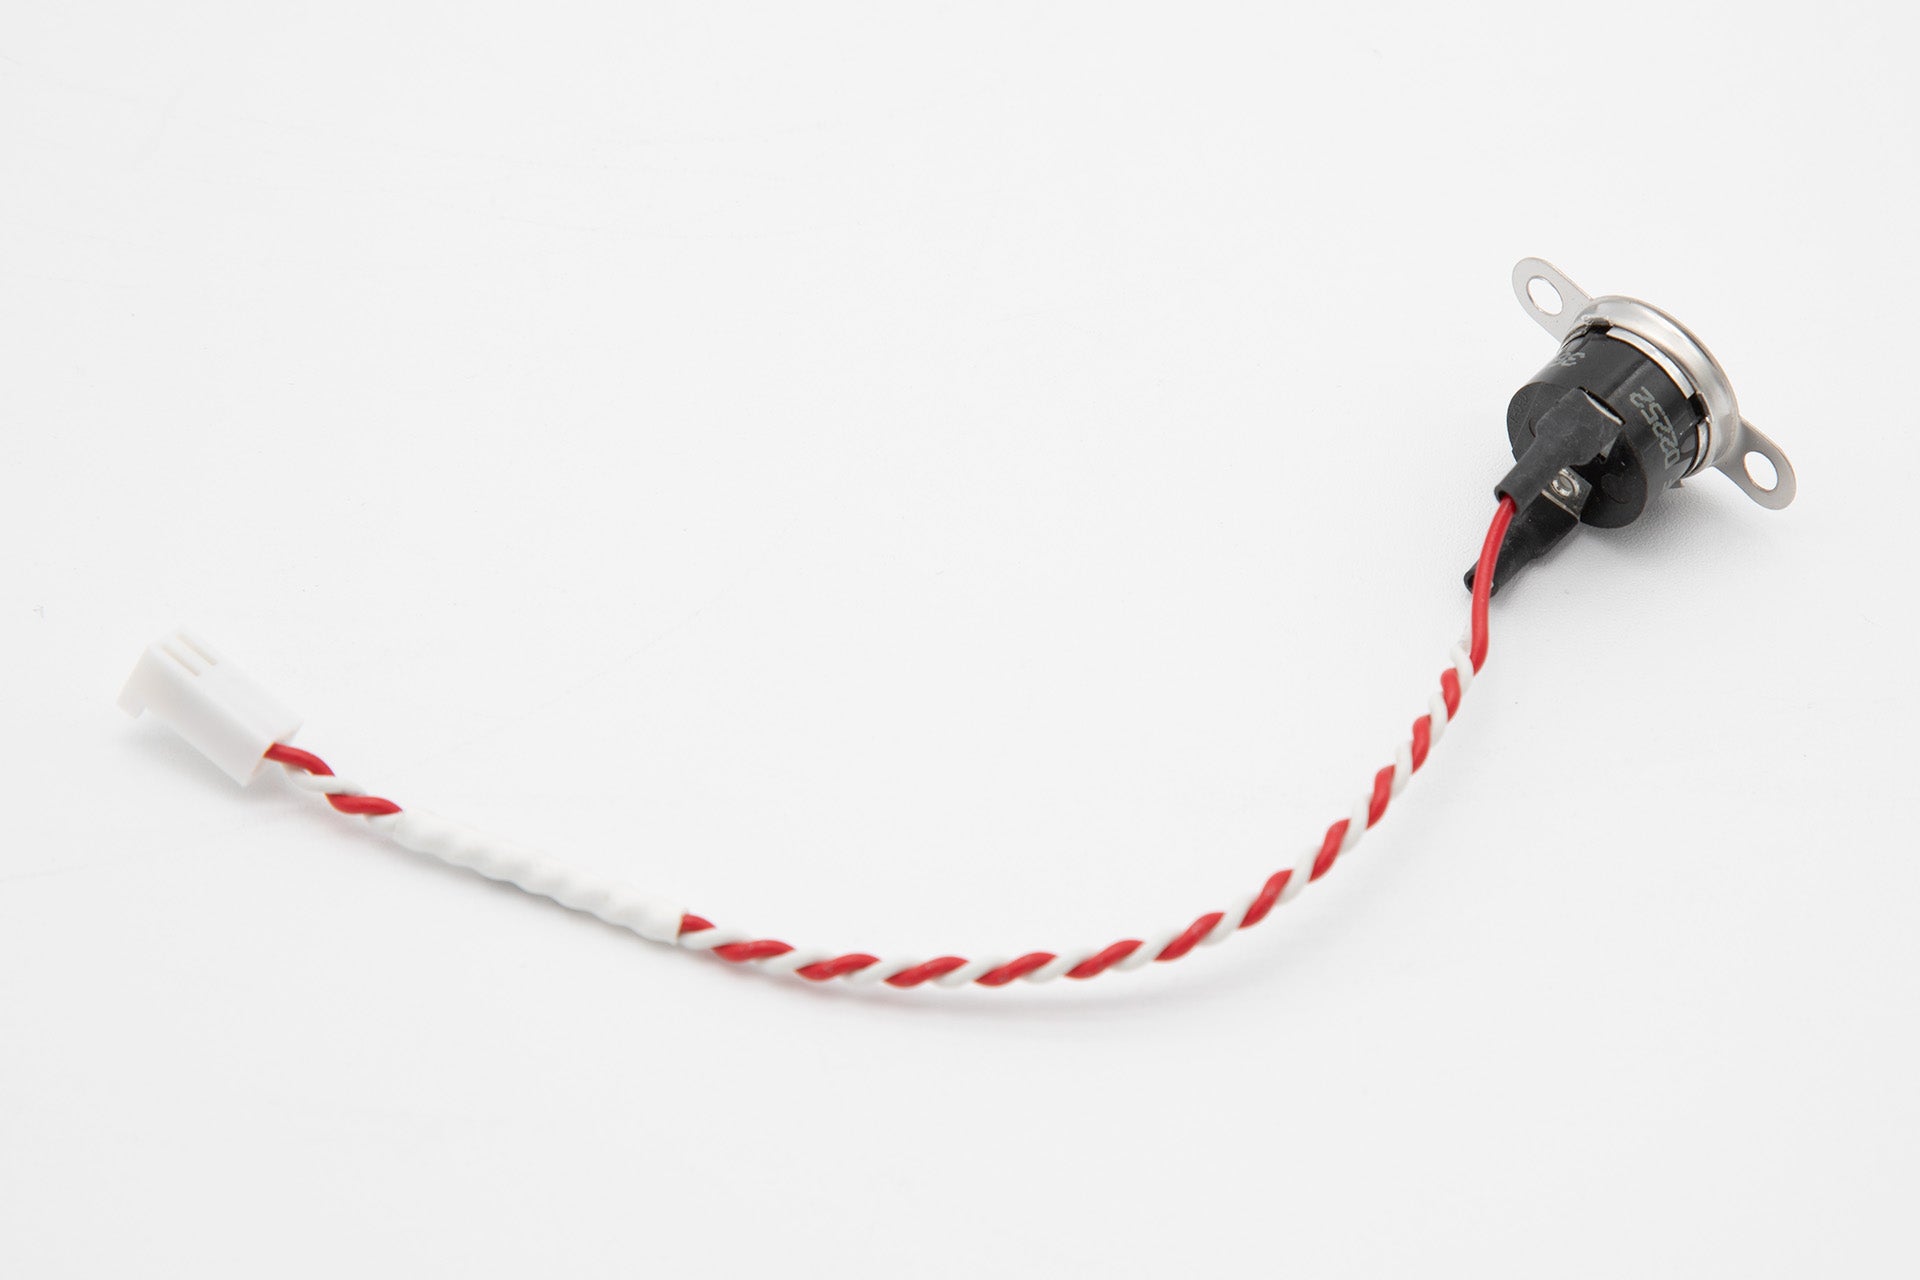 A red and white wire with a black and white cord